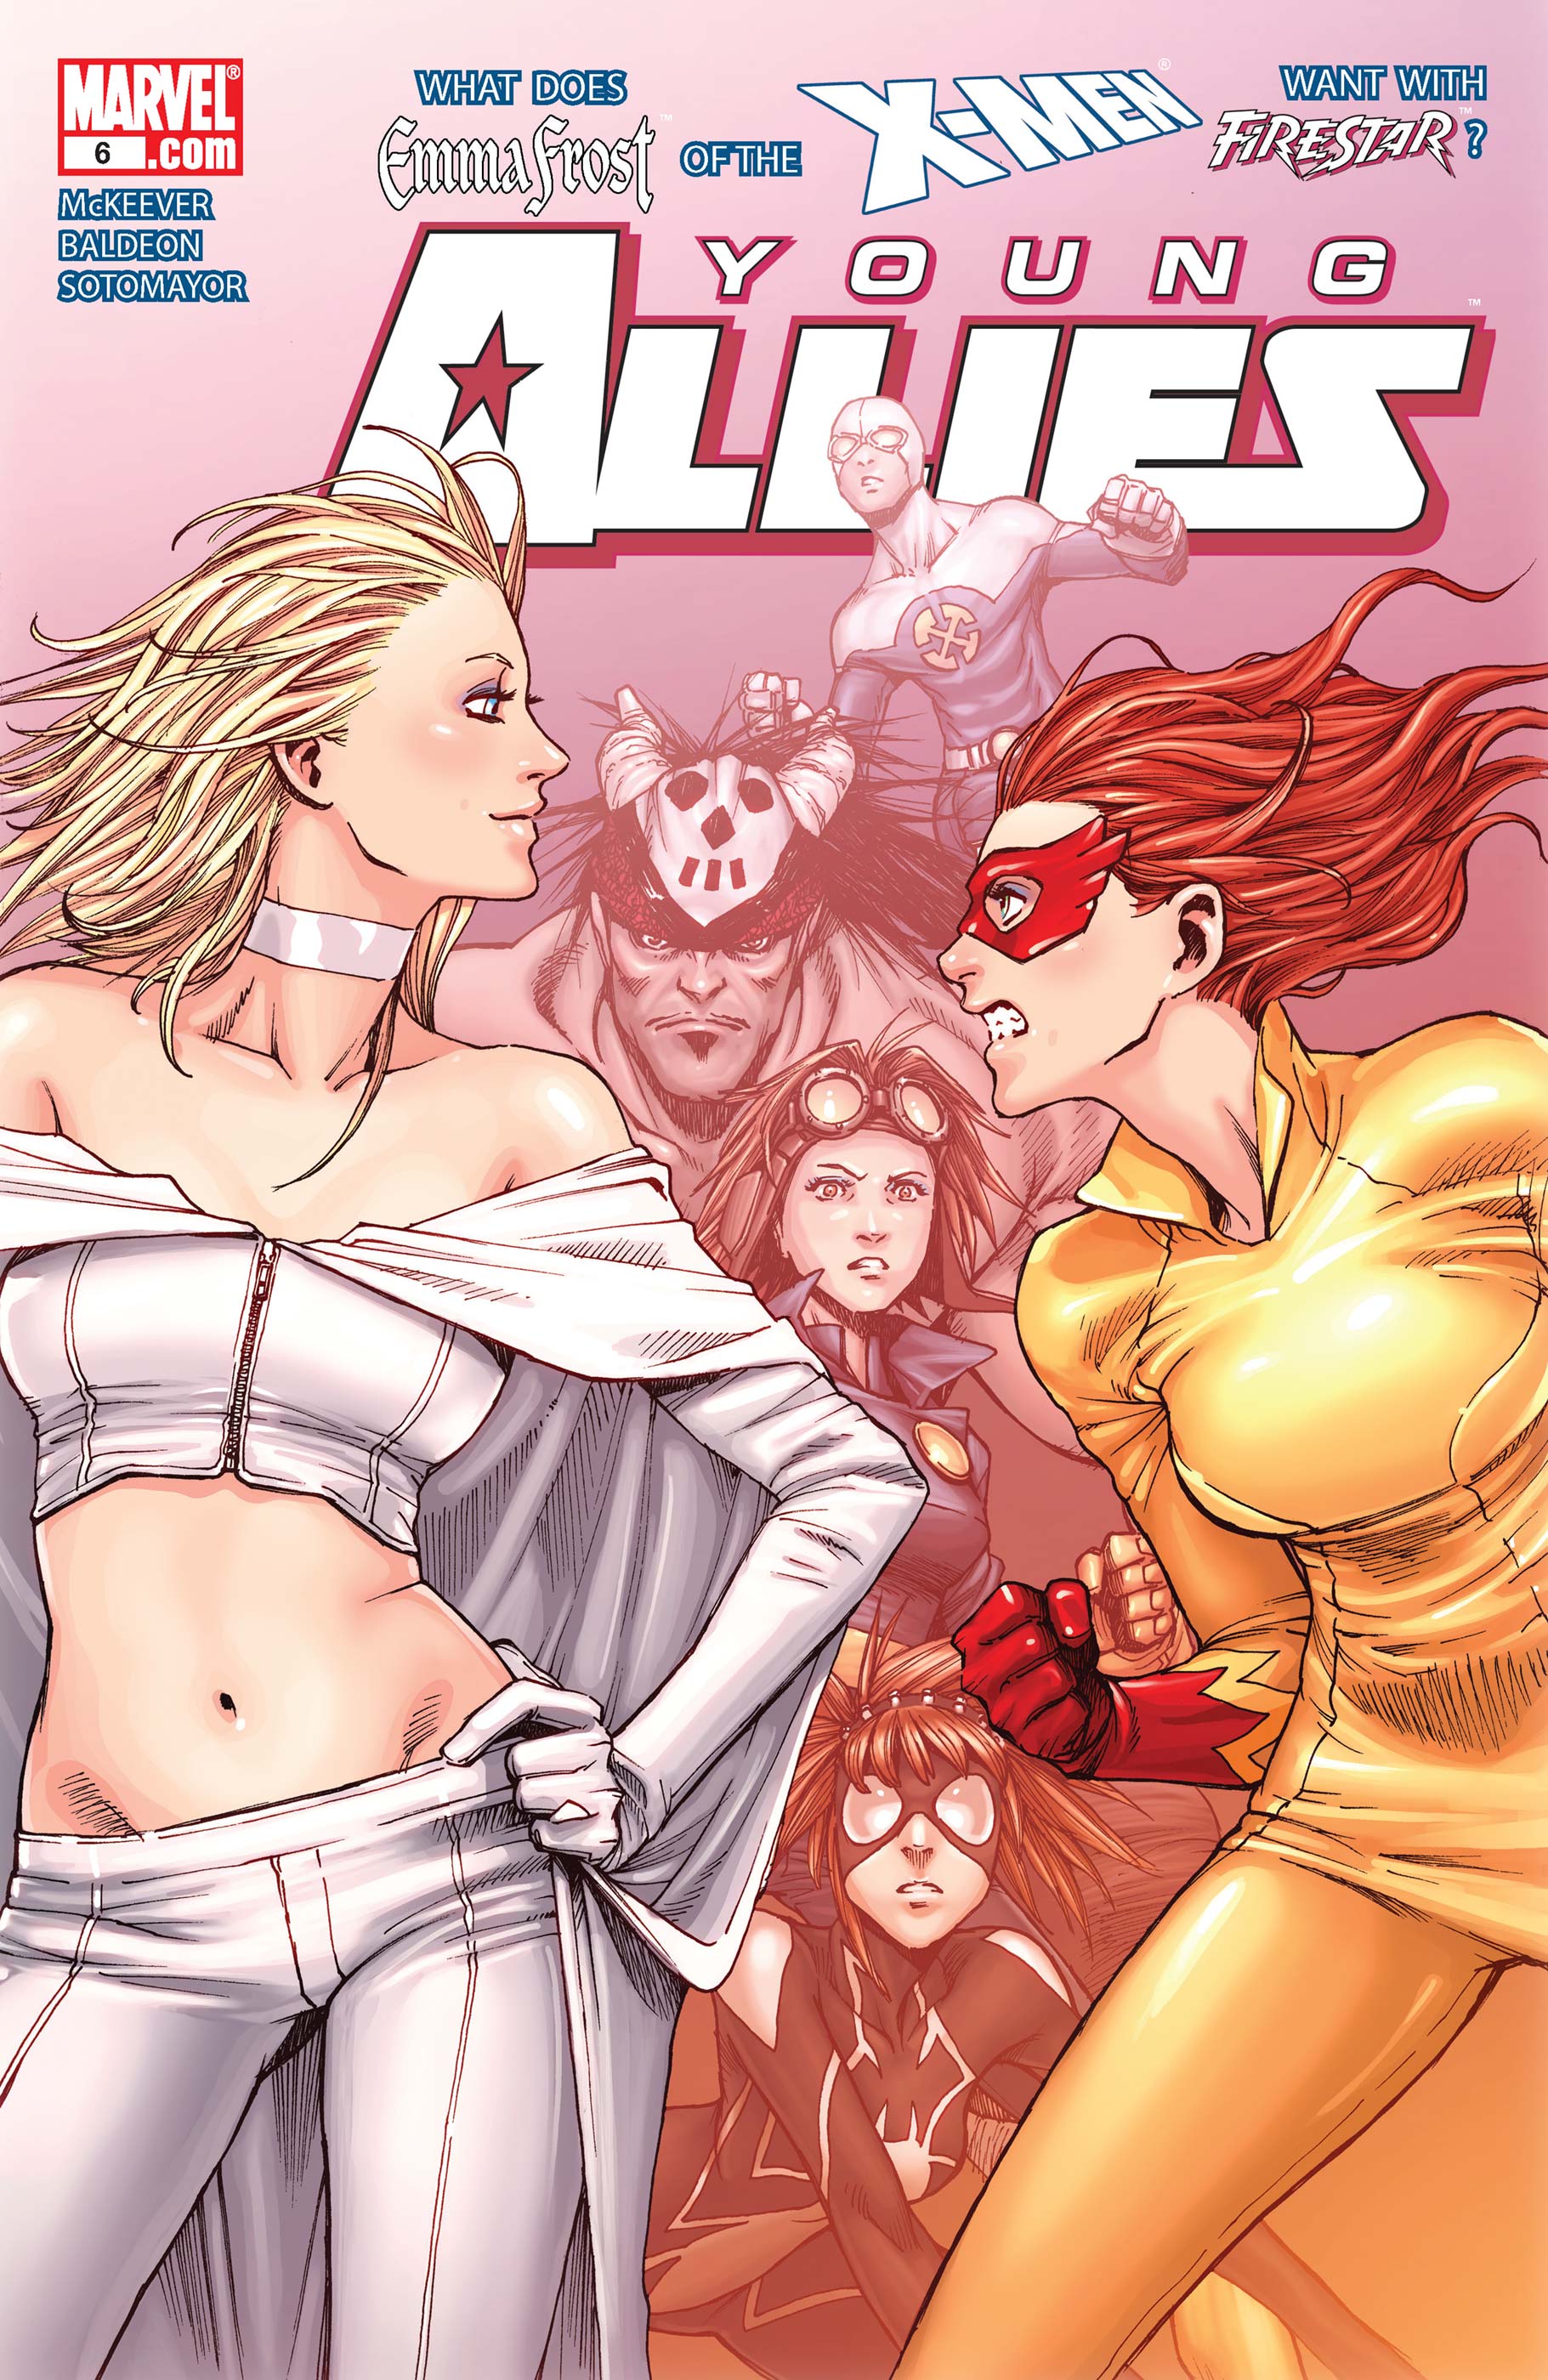 Young Allies (2010) #6